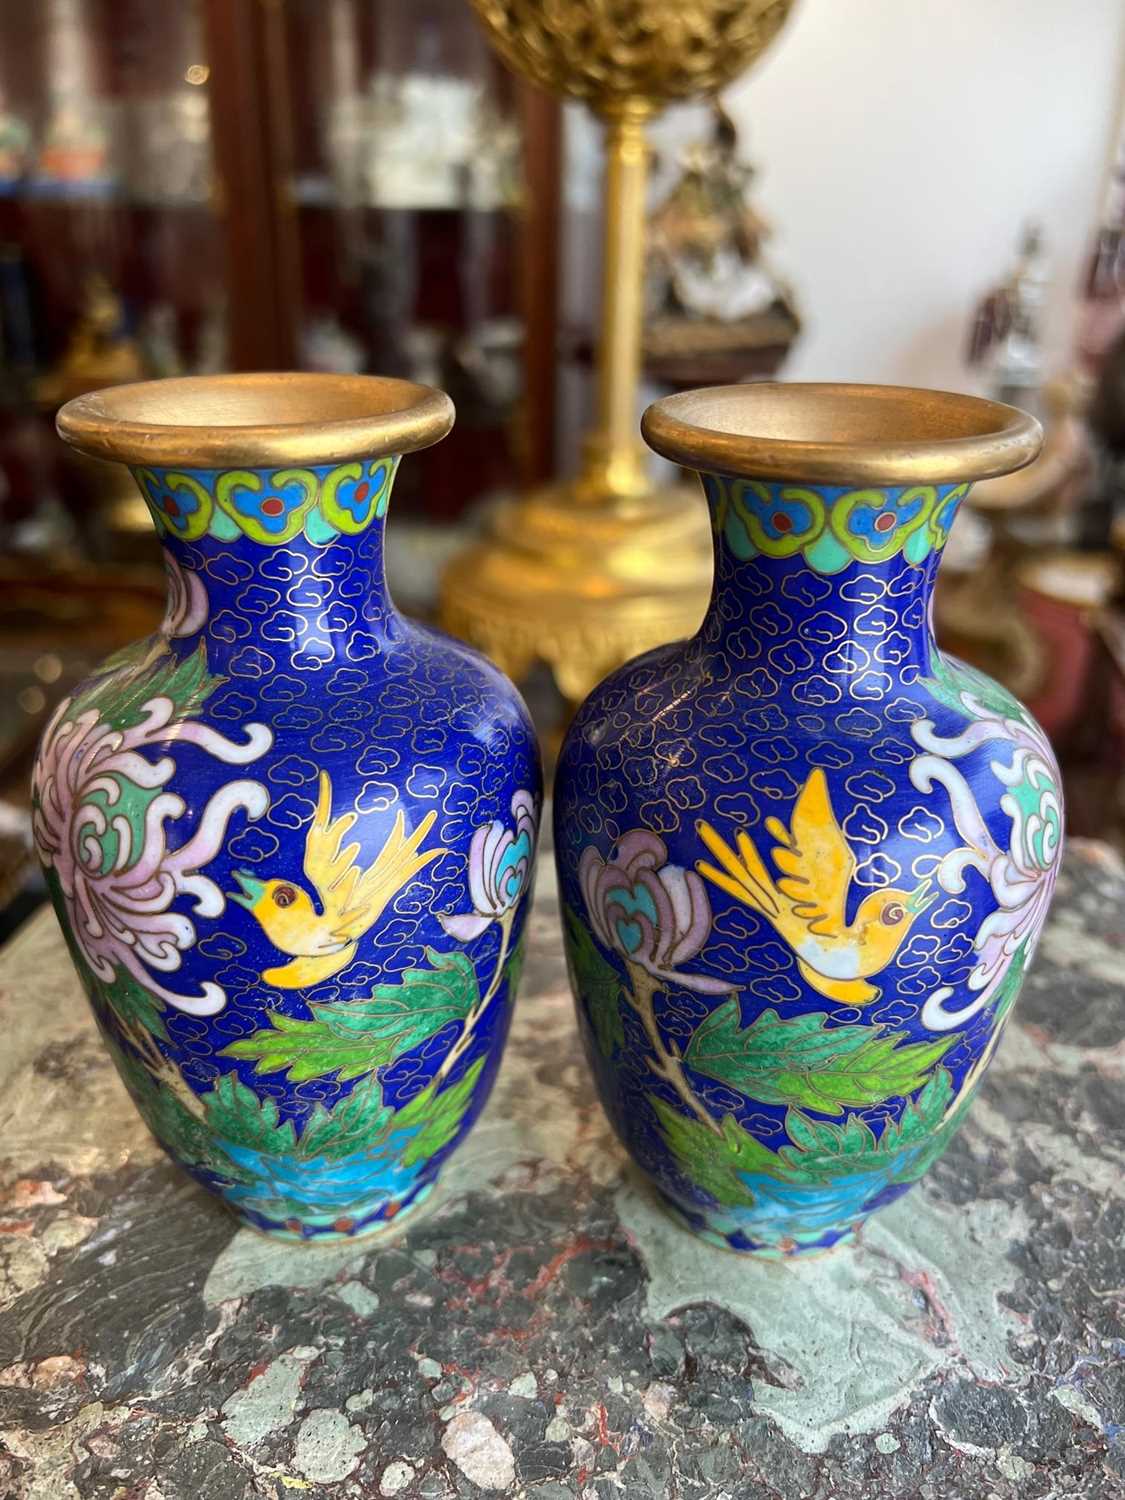 A COLLECTION OF SIX 19TH AND 20TH CENTURY CHINESE MINIATURE VASES - Image 10 of 22